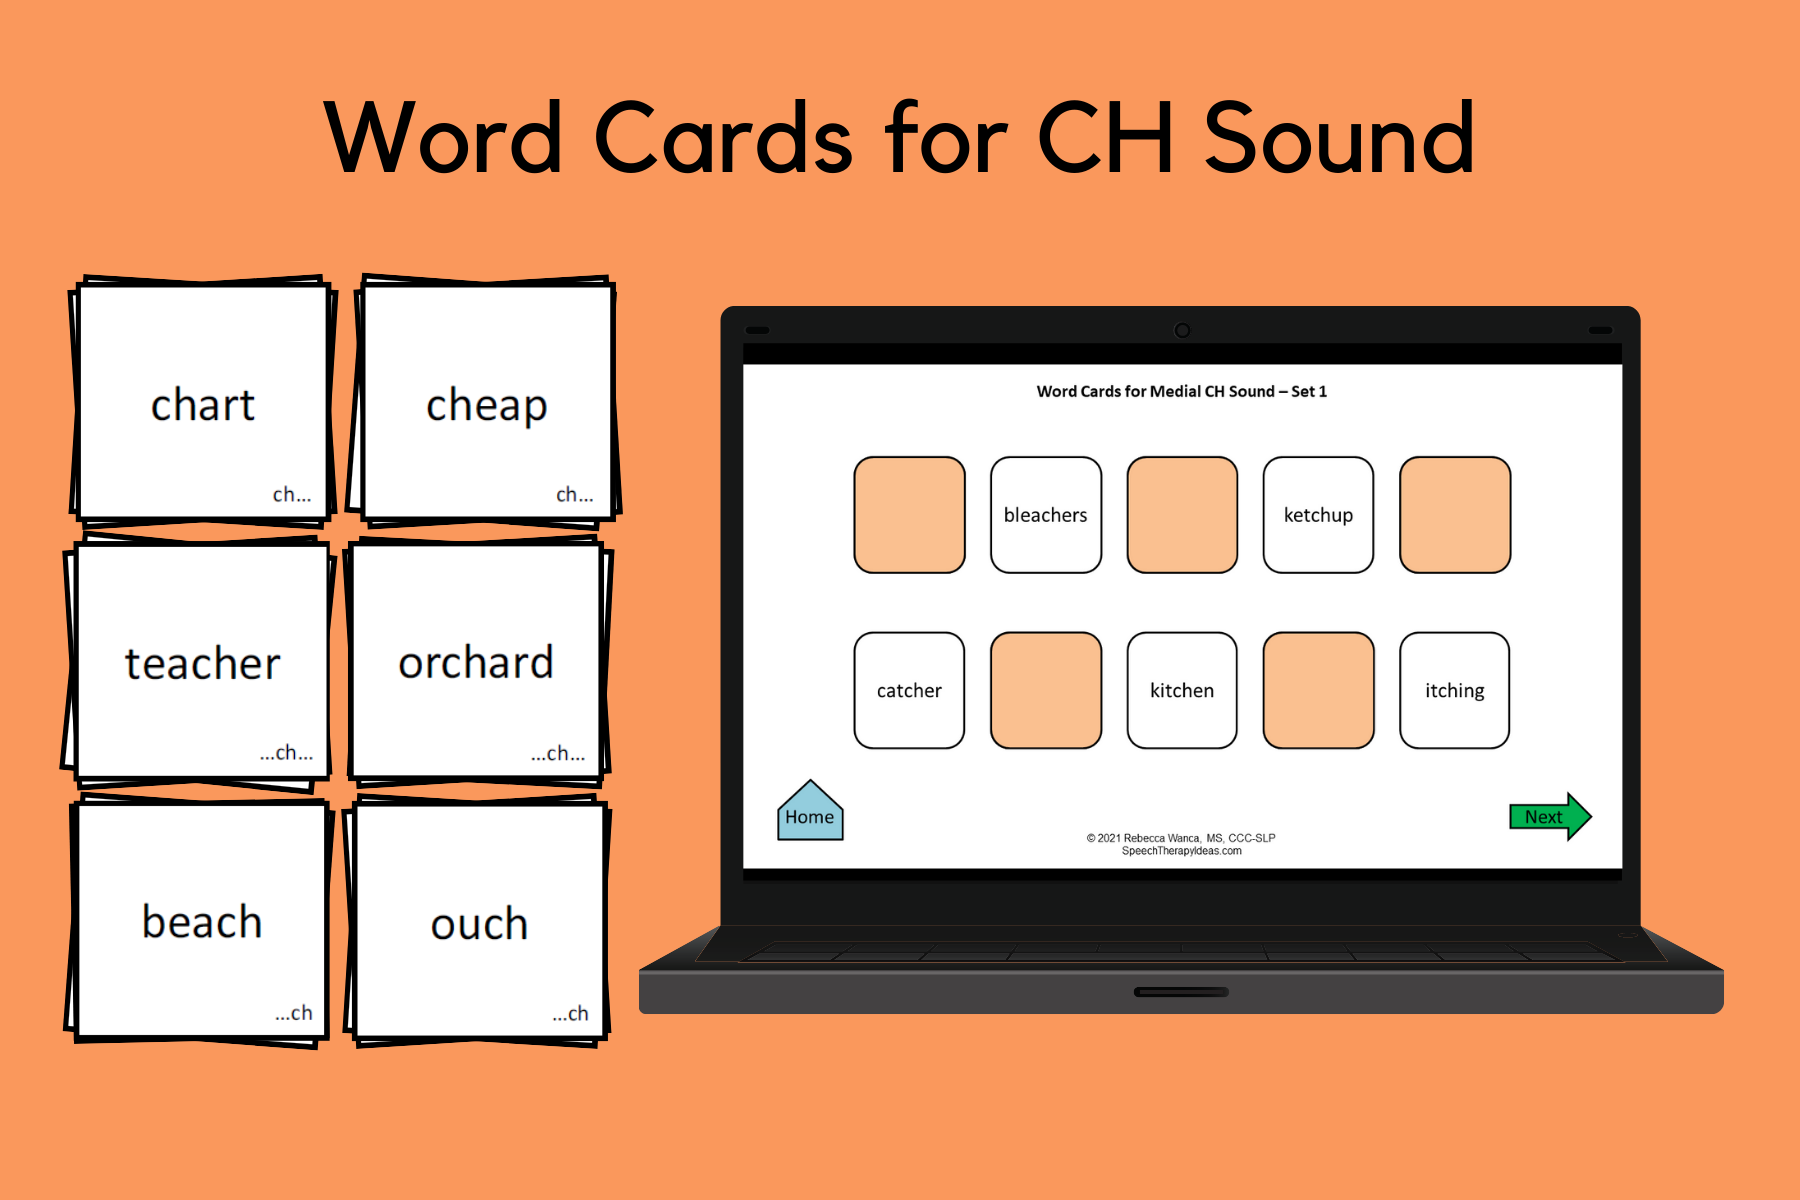 Word Cards for CH Sound